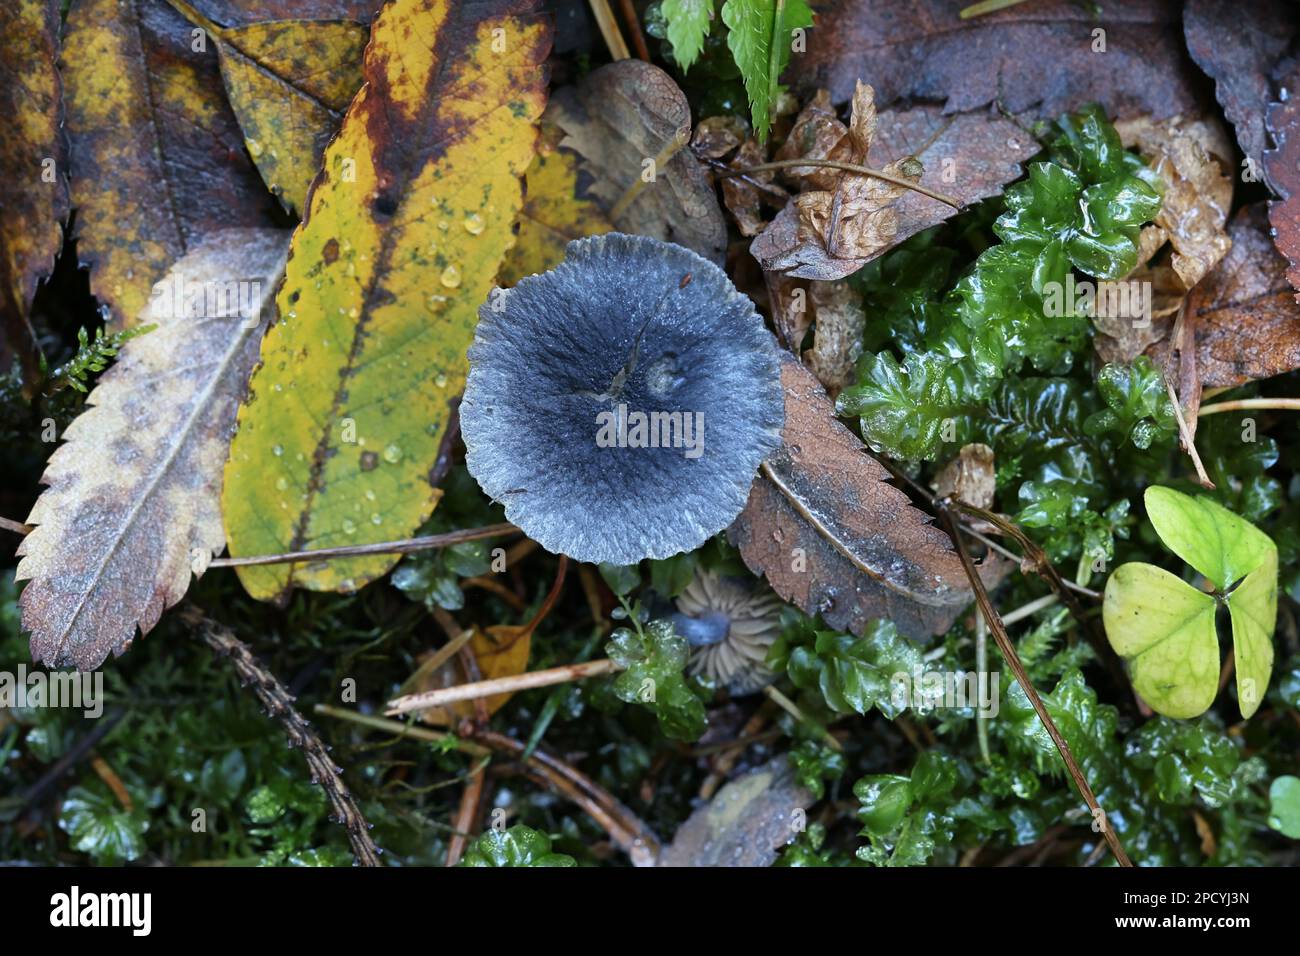 Entoloma nitidum, commonly known as pine pinkgill, wild mushroom from Finland Stock Photo